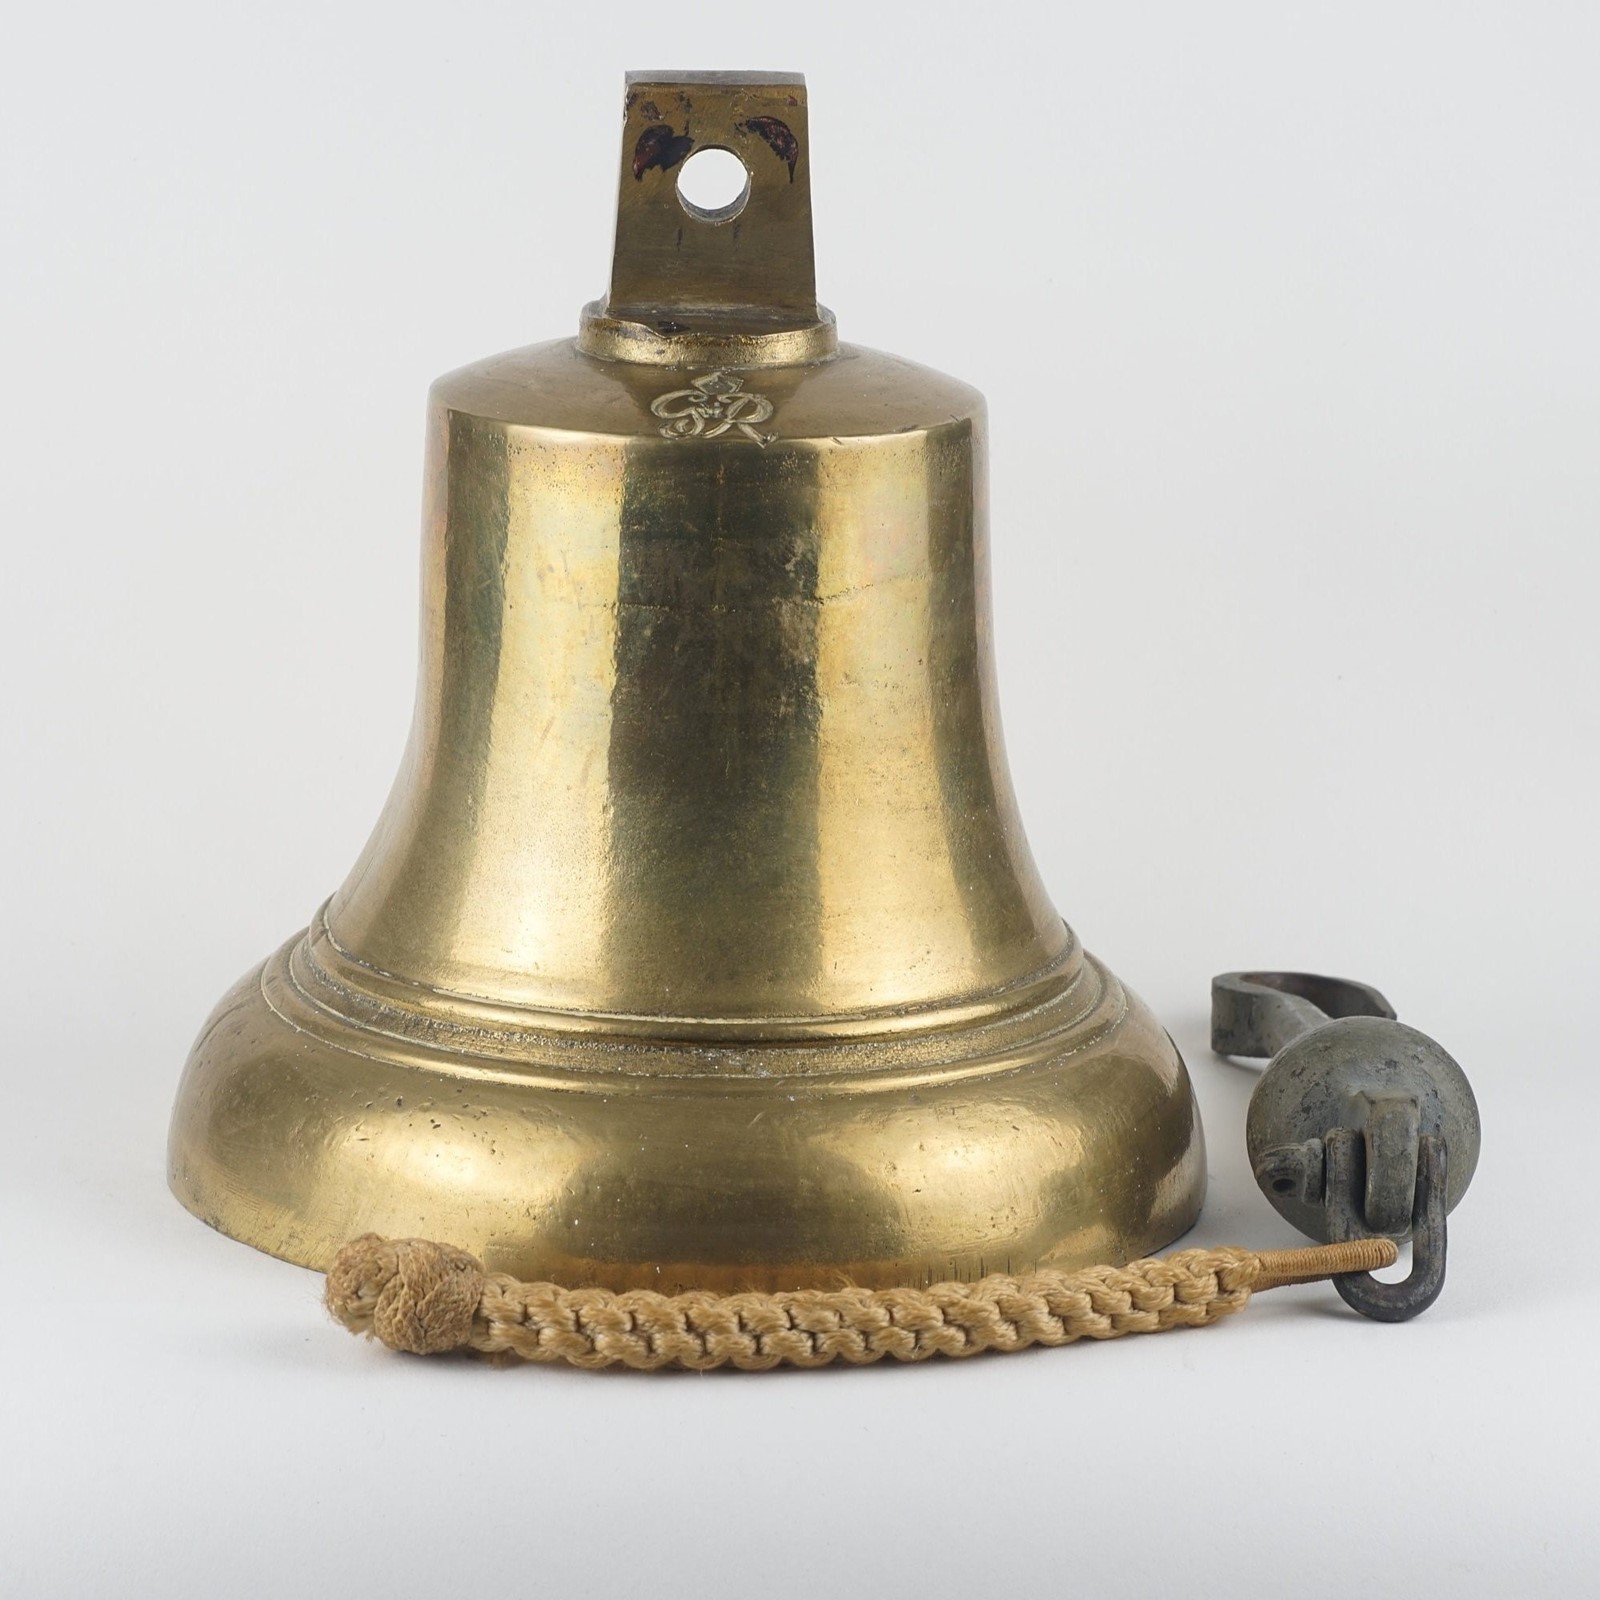 Antiques: Seafaring bells make great collectibles